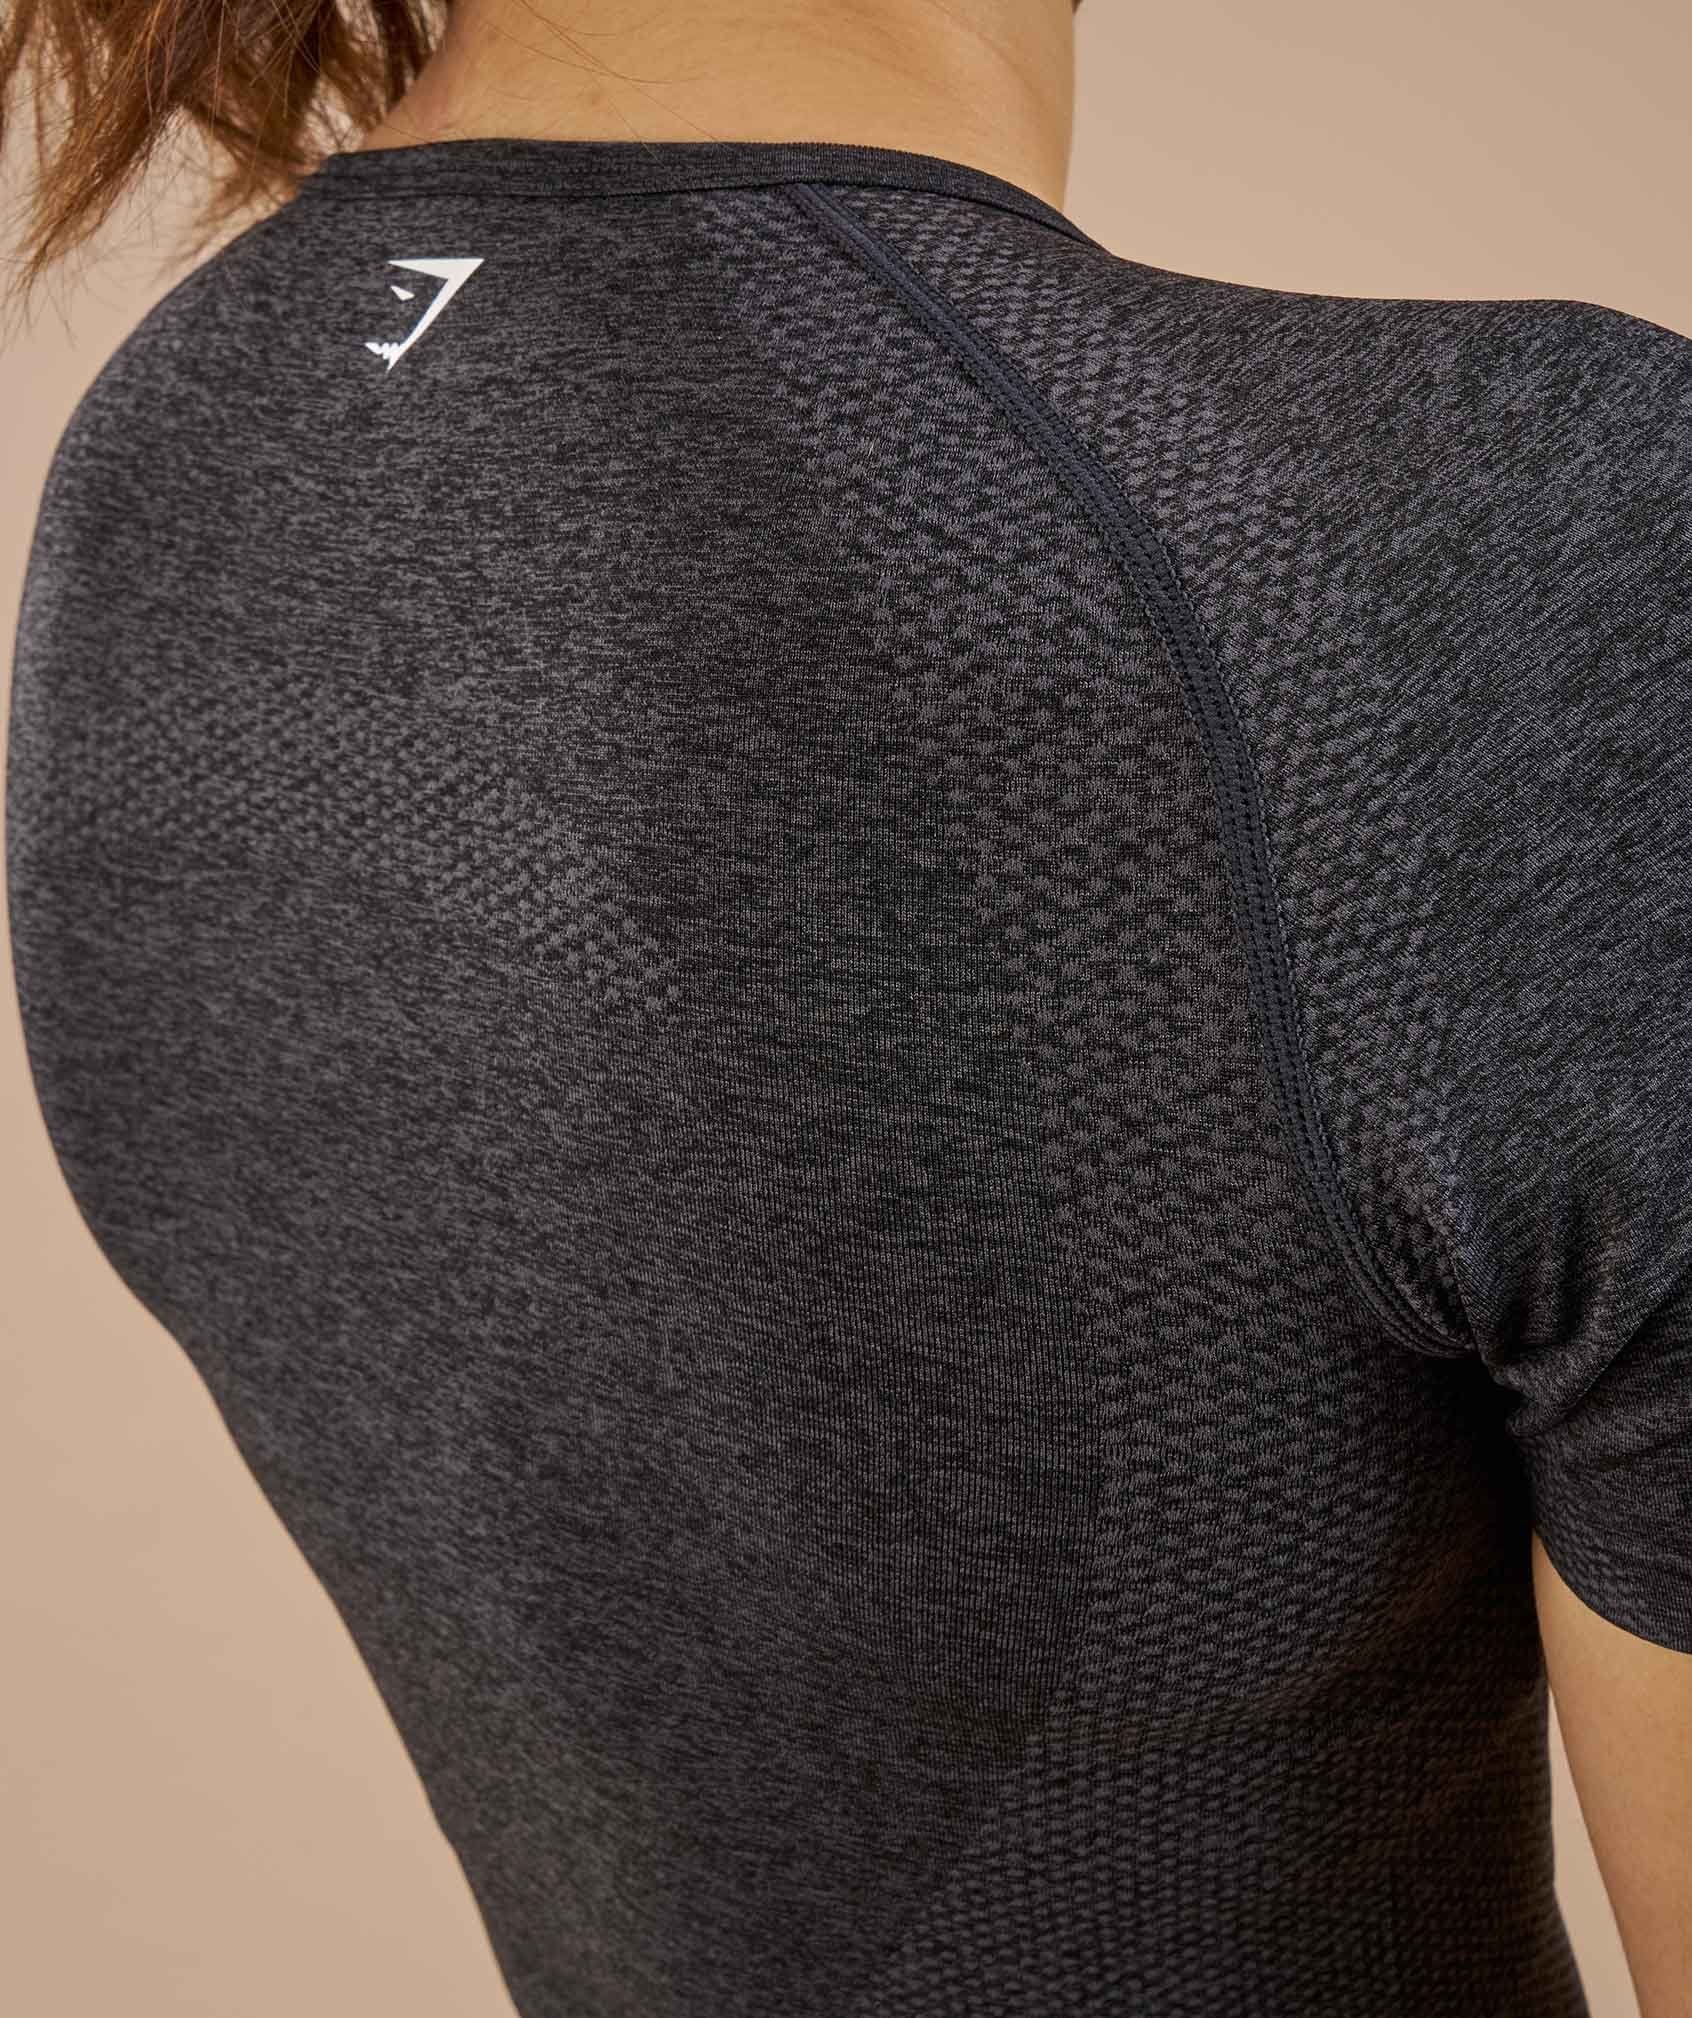 Seamless T-Shirt in Black Marl - view 5